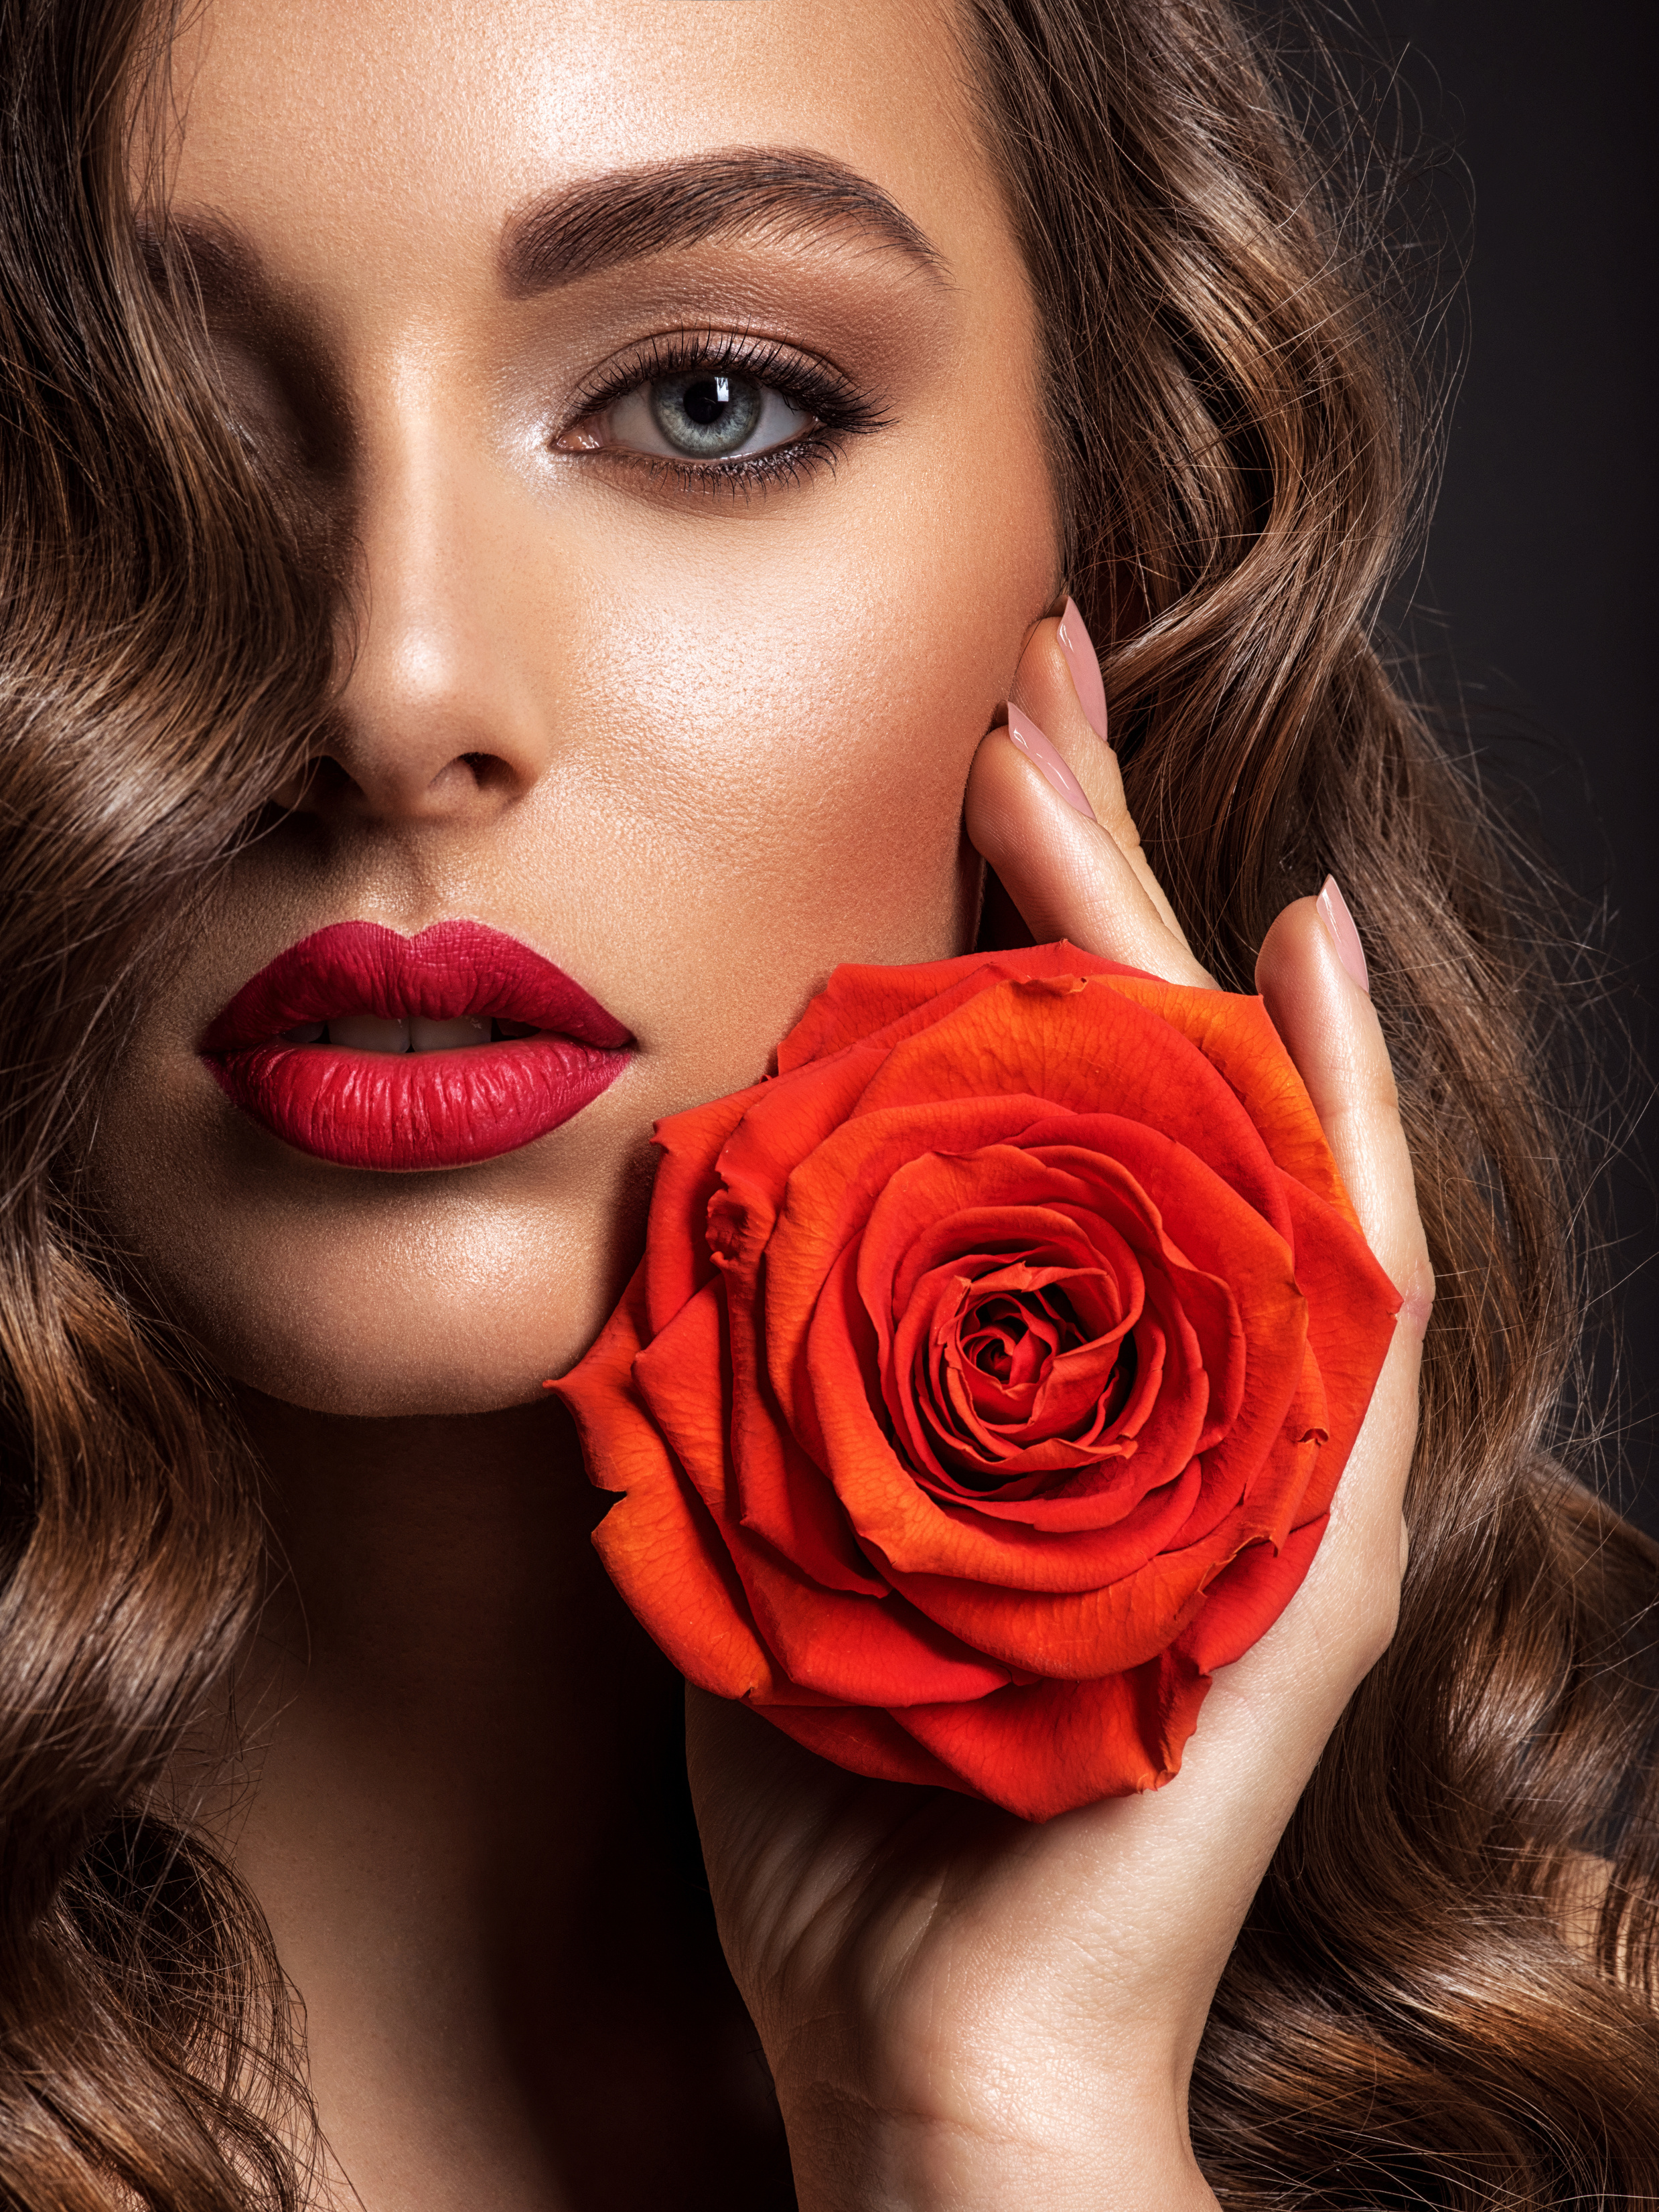 A Female Model Holding a Red Rose